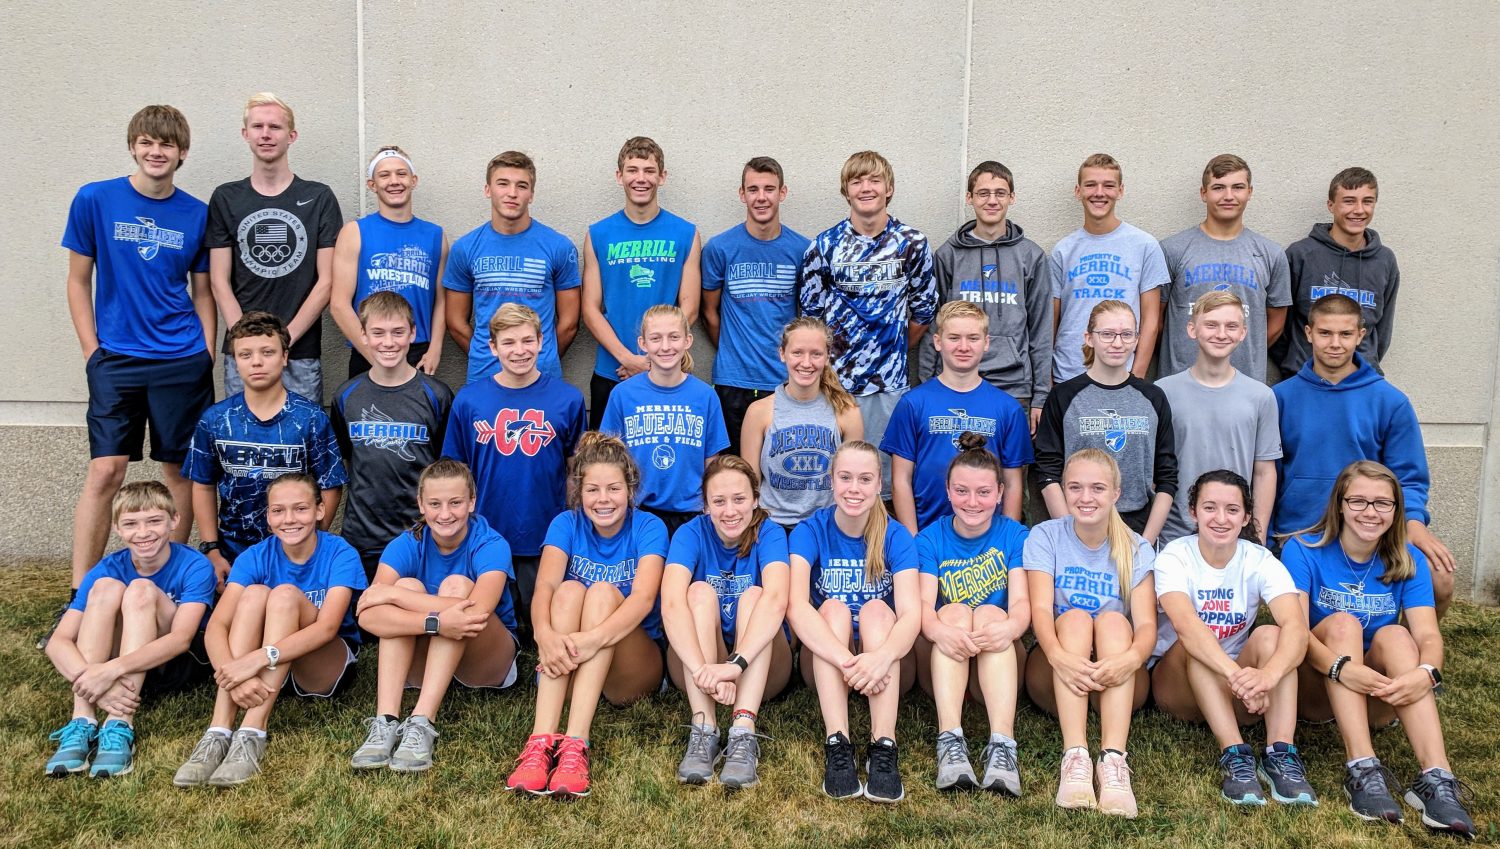 Bluejay runners get off to strong start